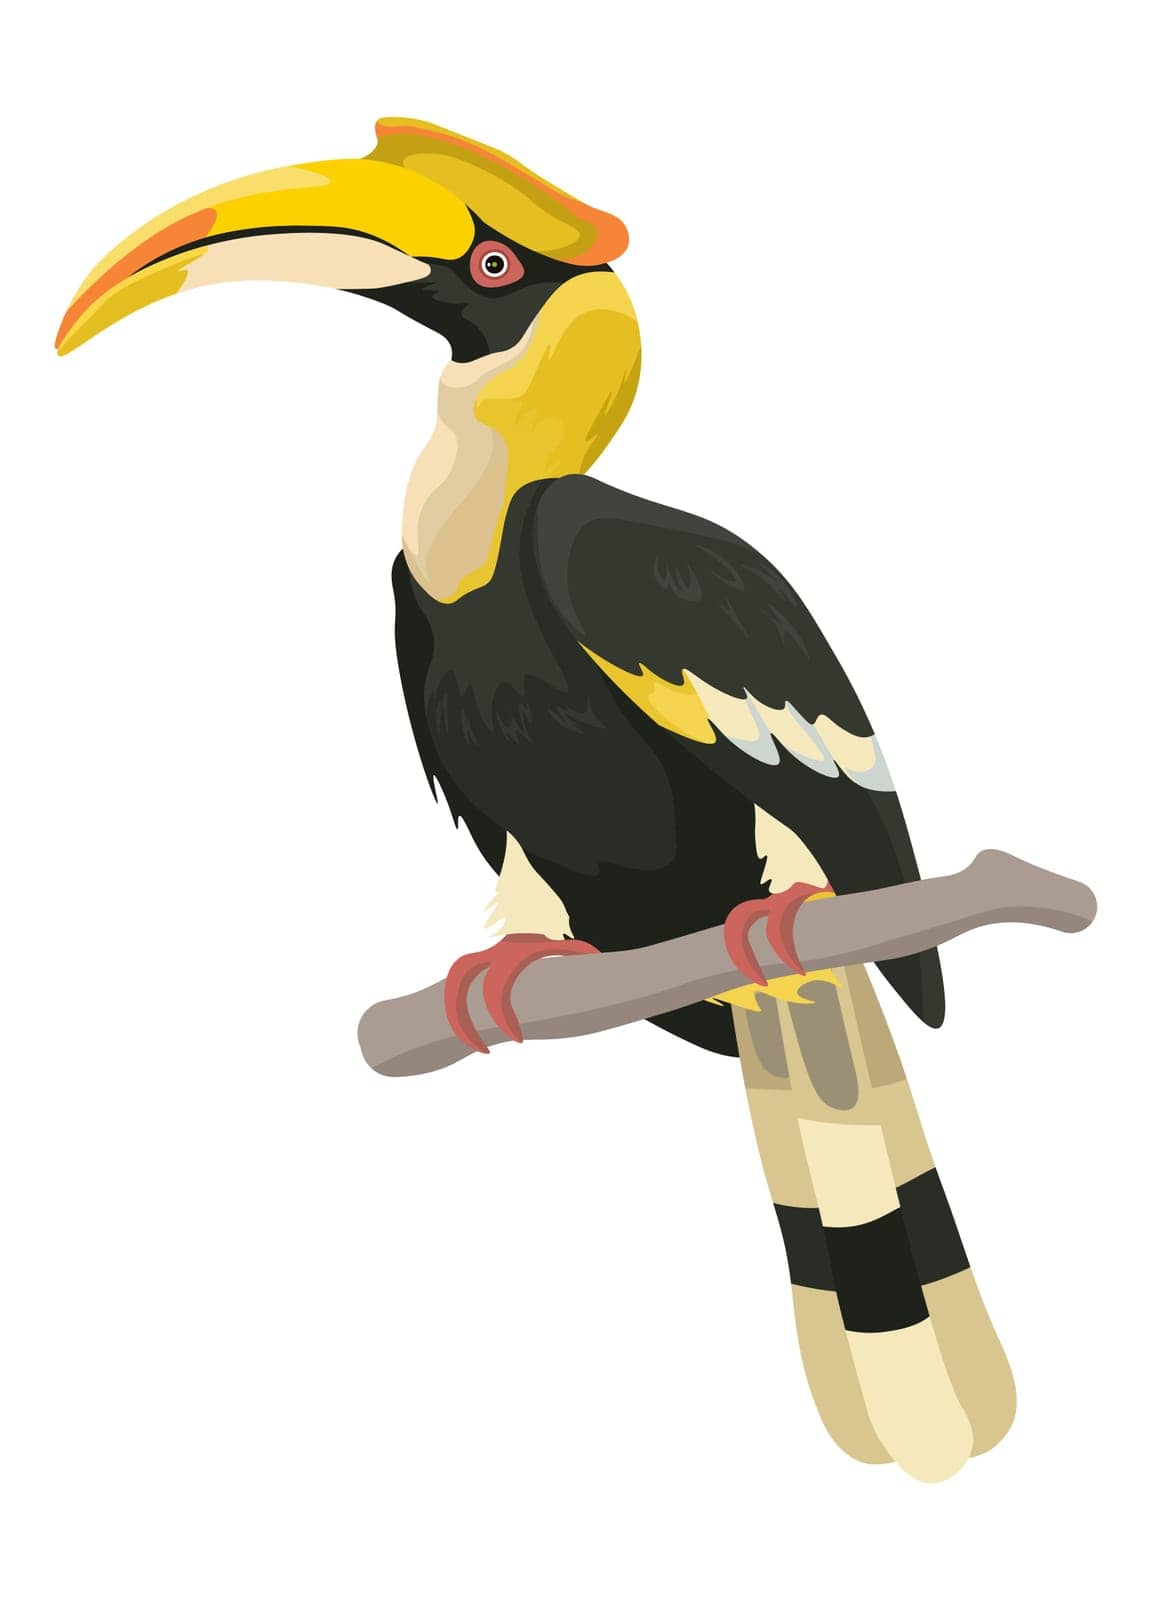 Tropical avian animal portrait, isolated exotic animal with curved beak sitting on twig or branch in forest. Fauna and wilderness of warm countries, zoo and ornithology. Vector in flat style